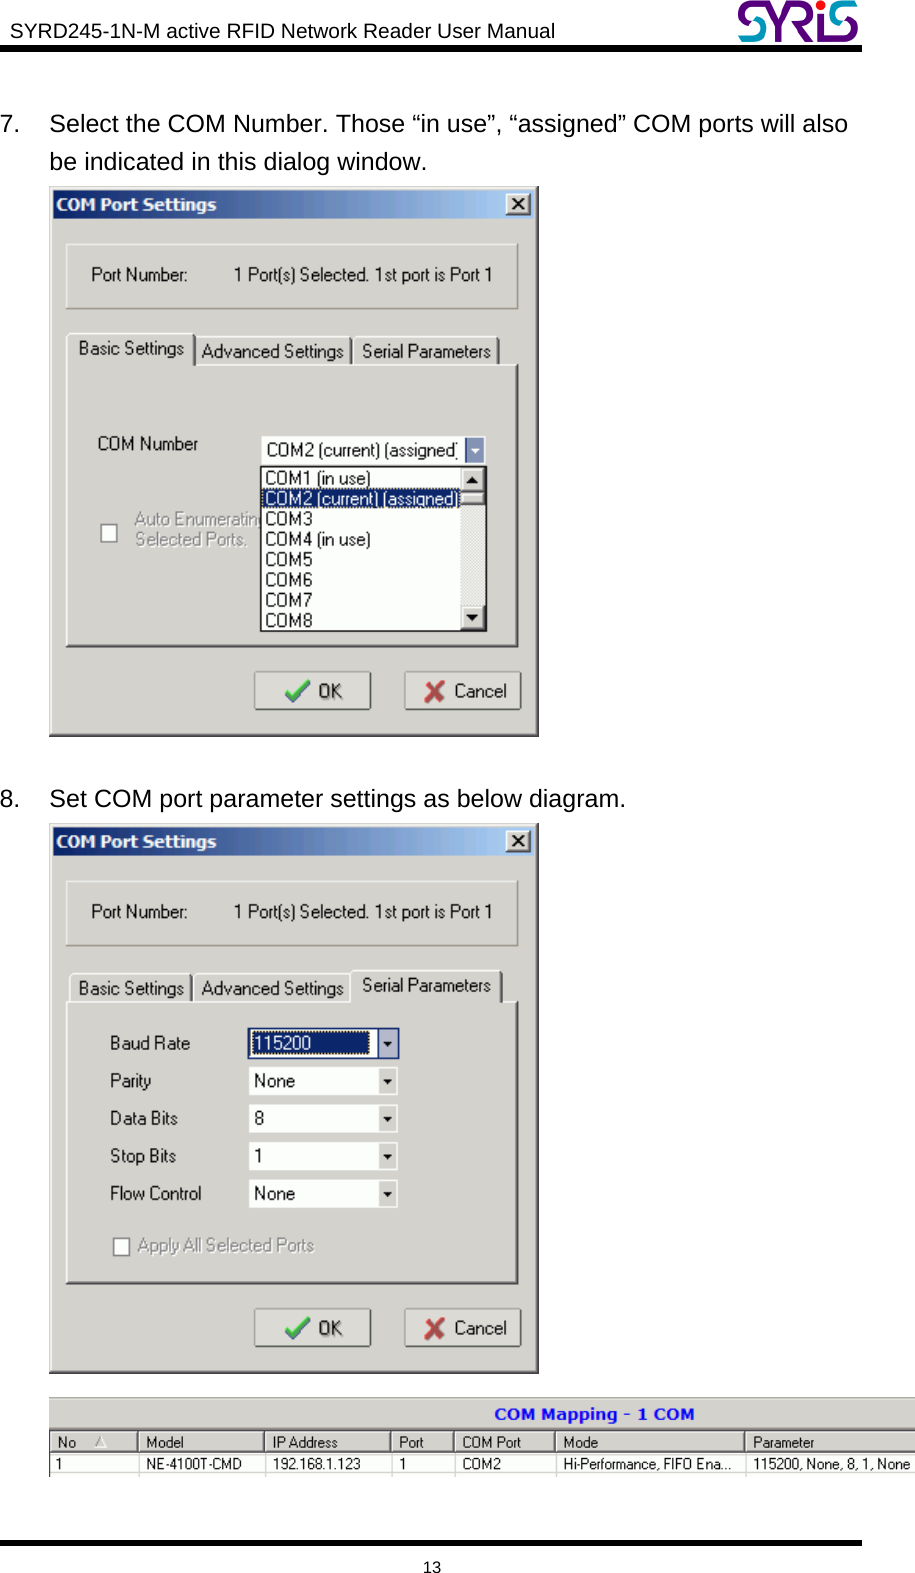  SYRD245-1N-M active RFID Network Reader User Manual     13  7.  Select the COM Number. Those “in use”, “assigned” COM ports will also be indicated in this dialog window.   8.  Set COM port parameter settings as below diagram.   